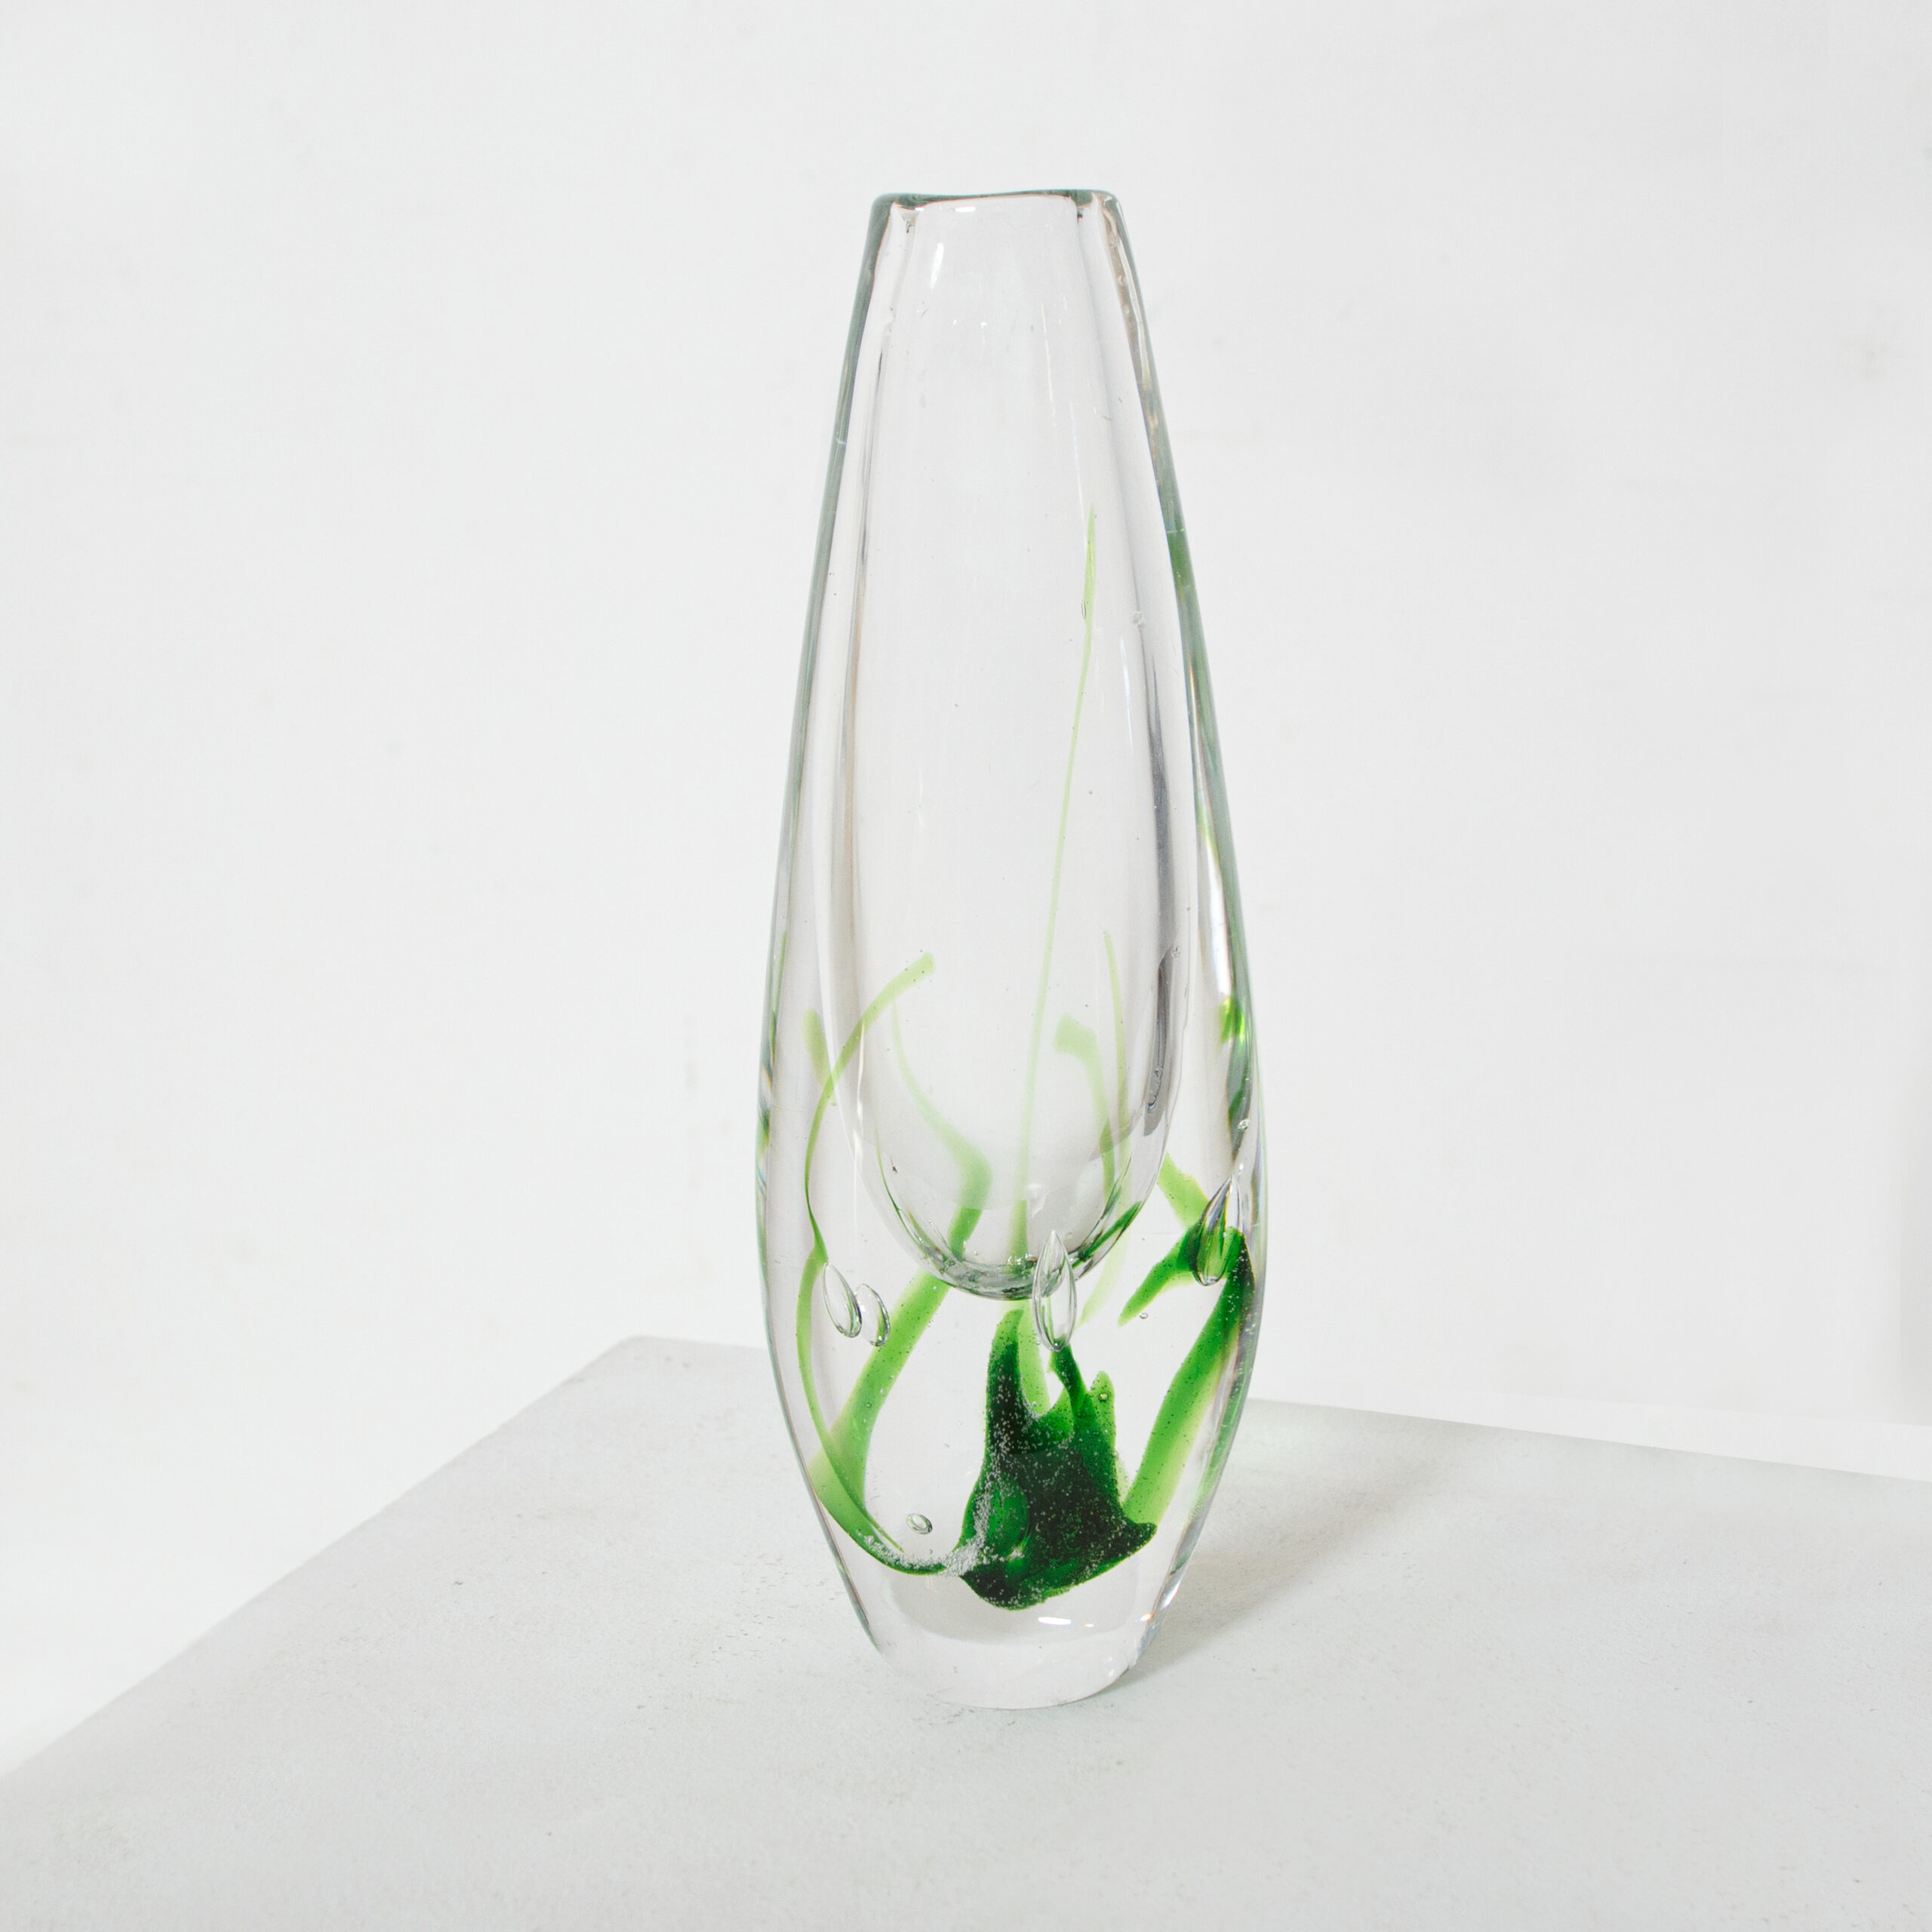 another green-transparent glass vase